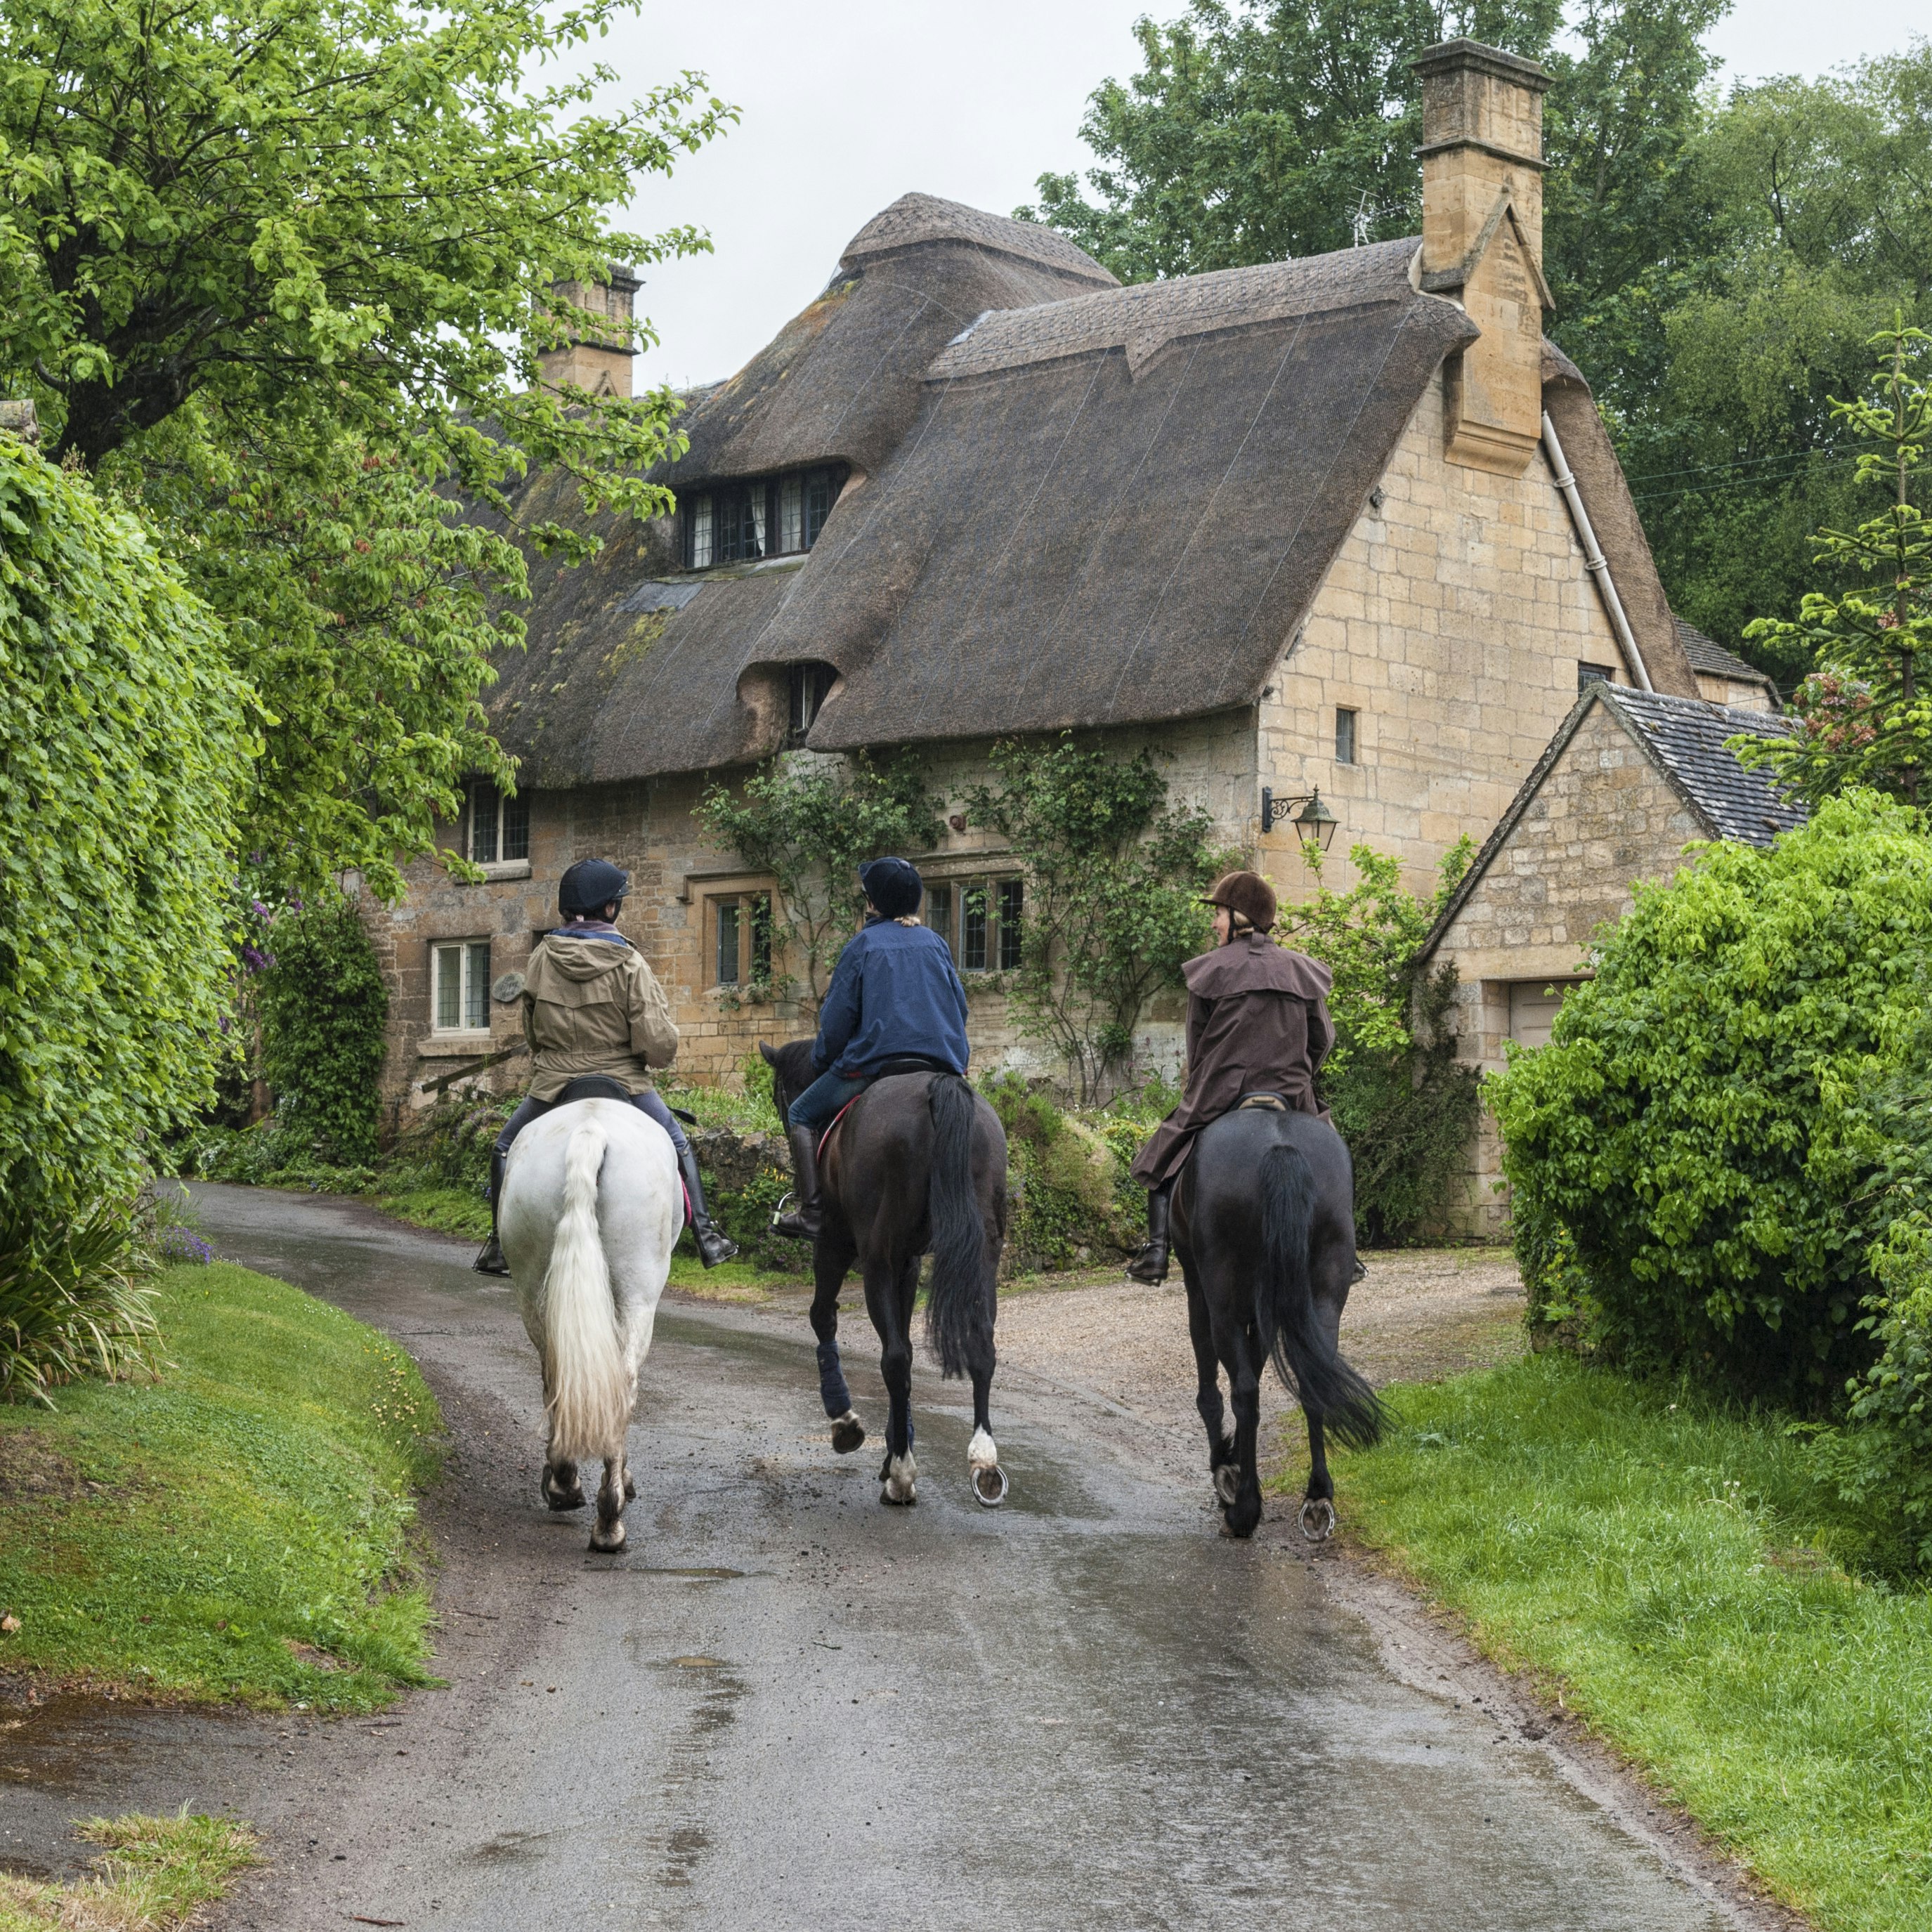 Unidentifed people and horses near cottages in the village of Stanton, Cotswolds district of Gloucestershire.